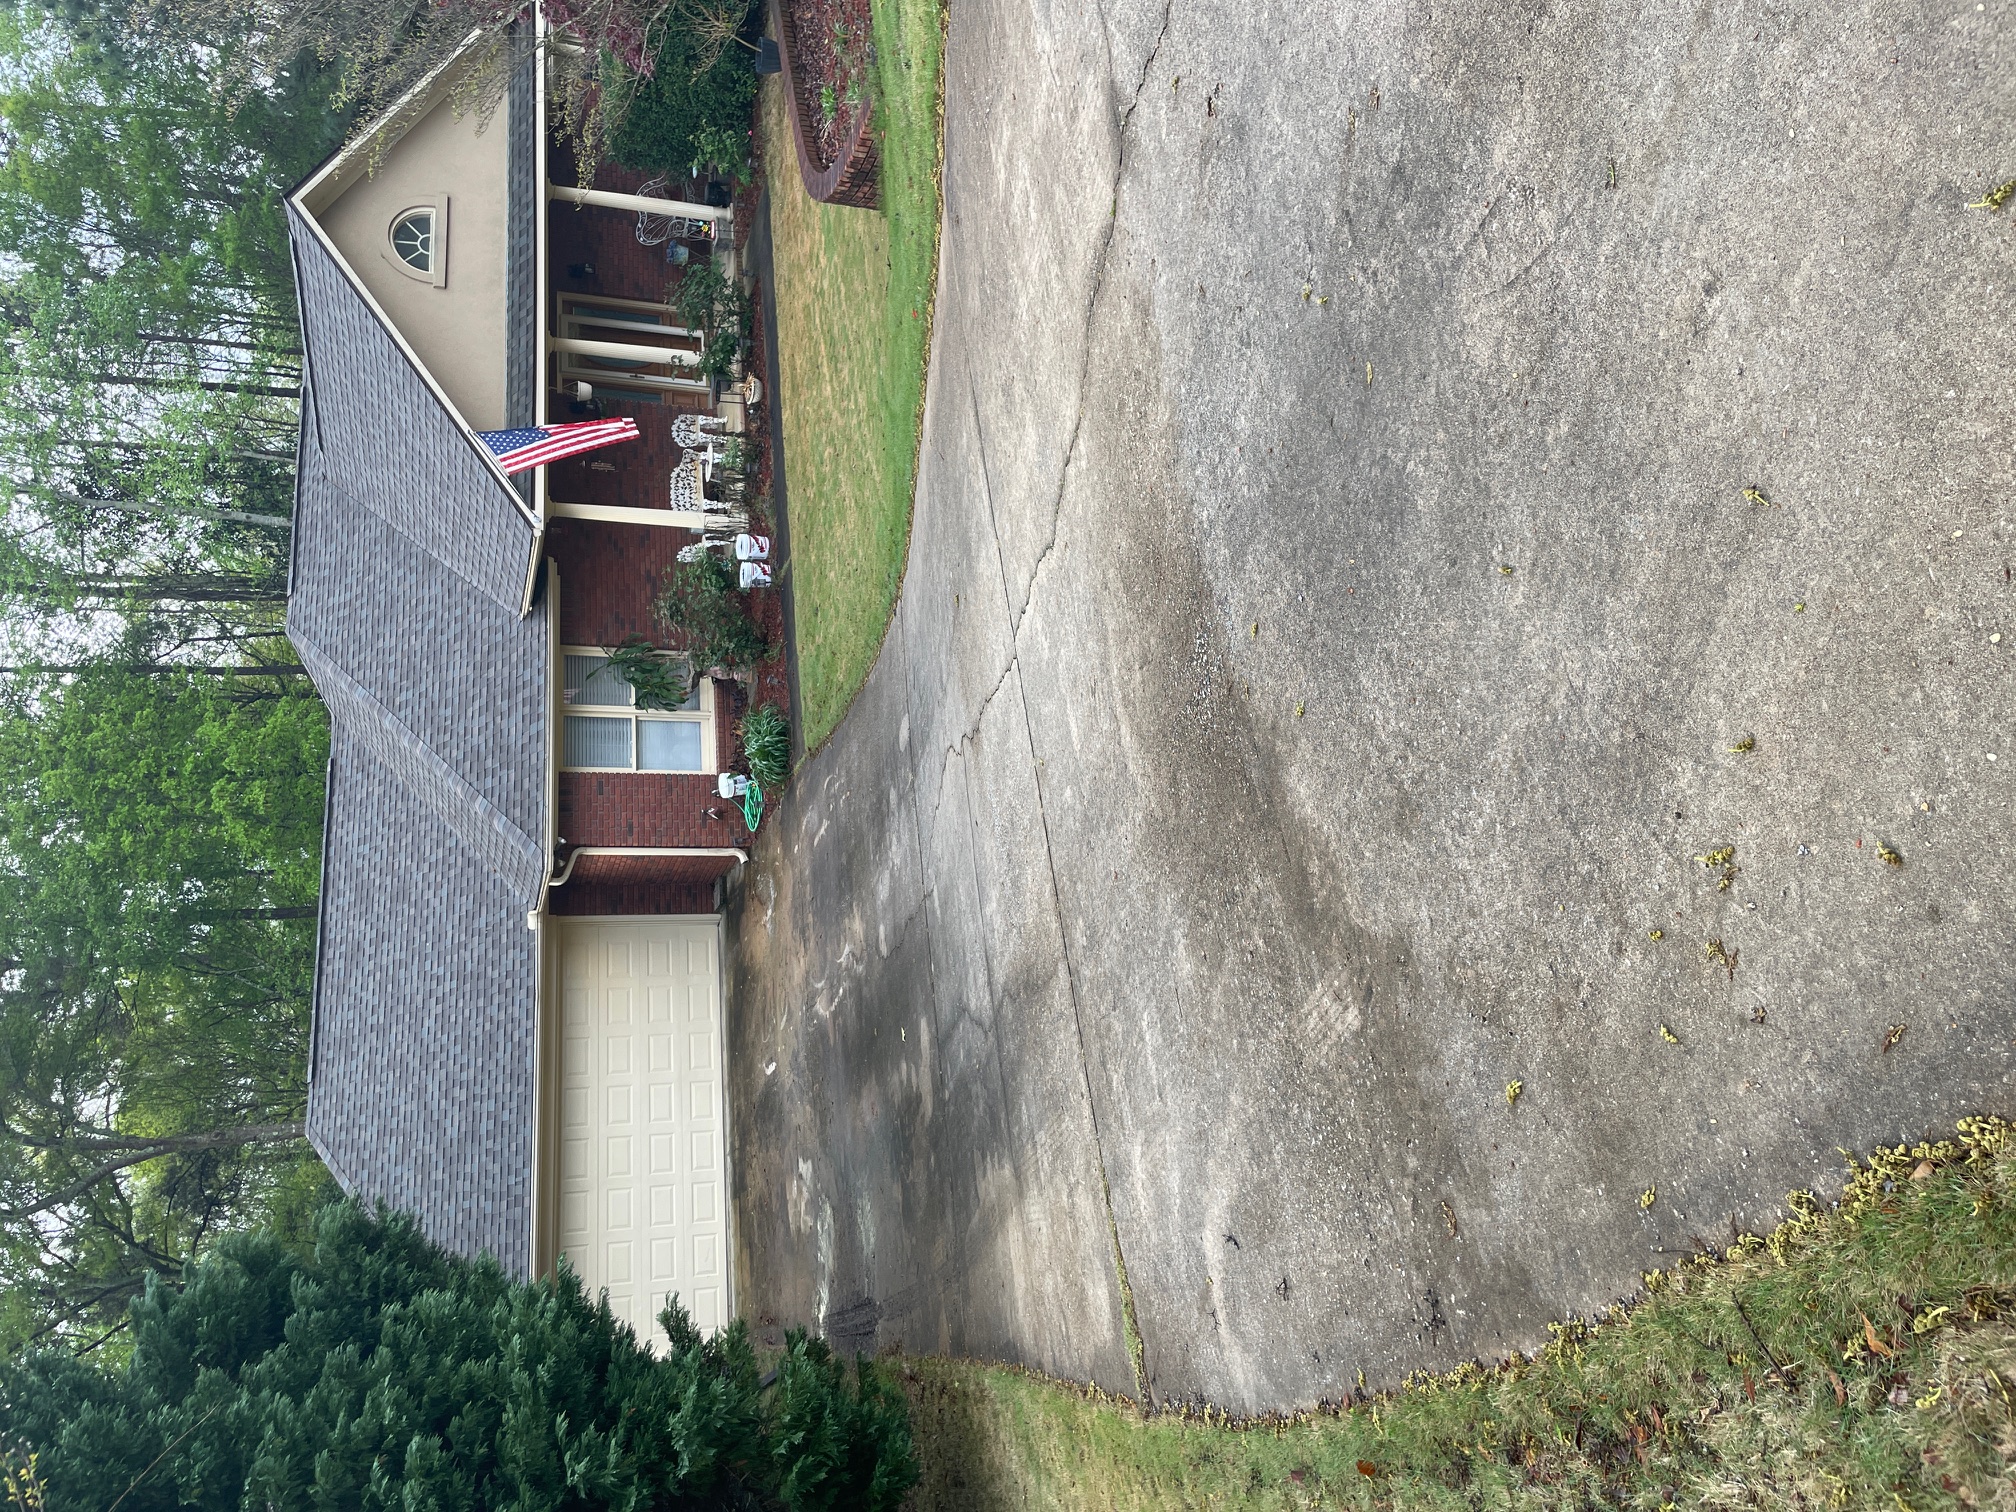 Amazing driveway washing completed in Phenix City, AL